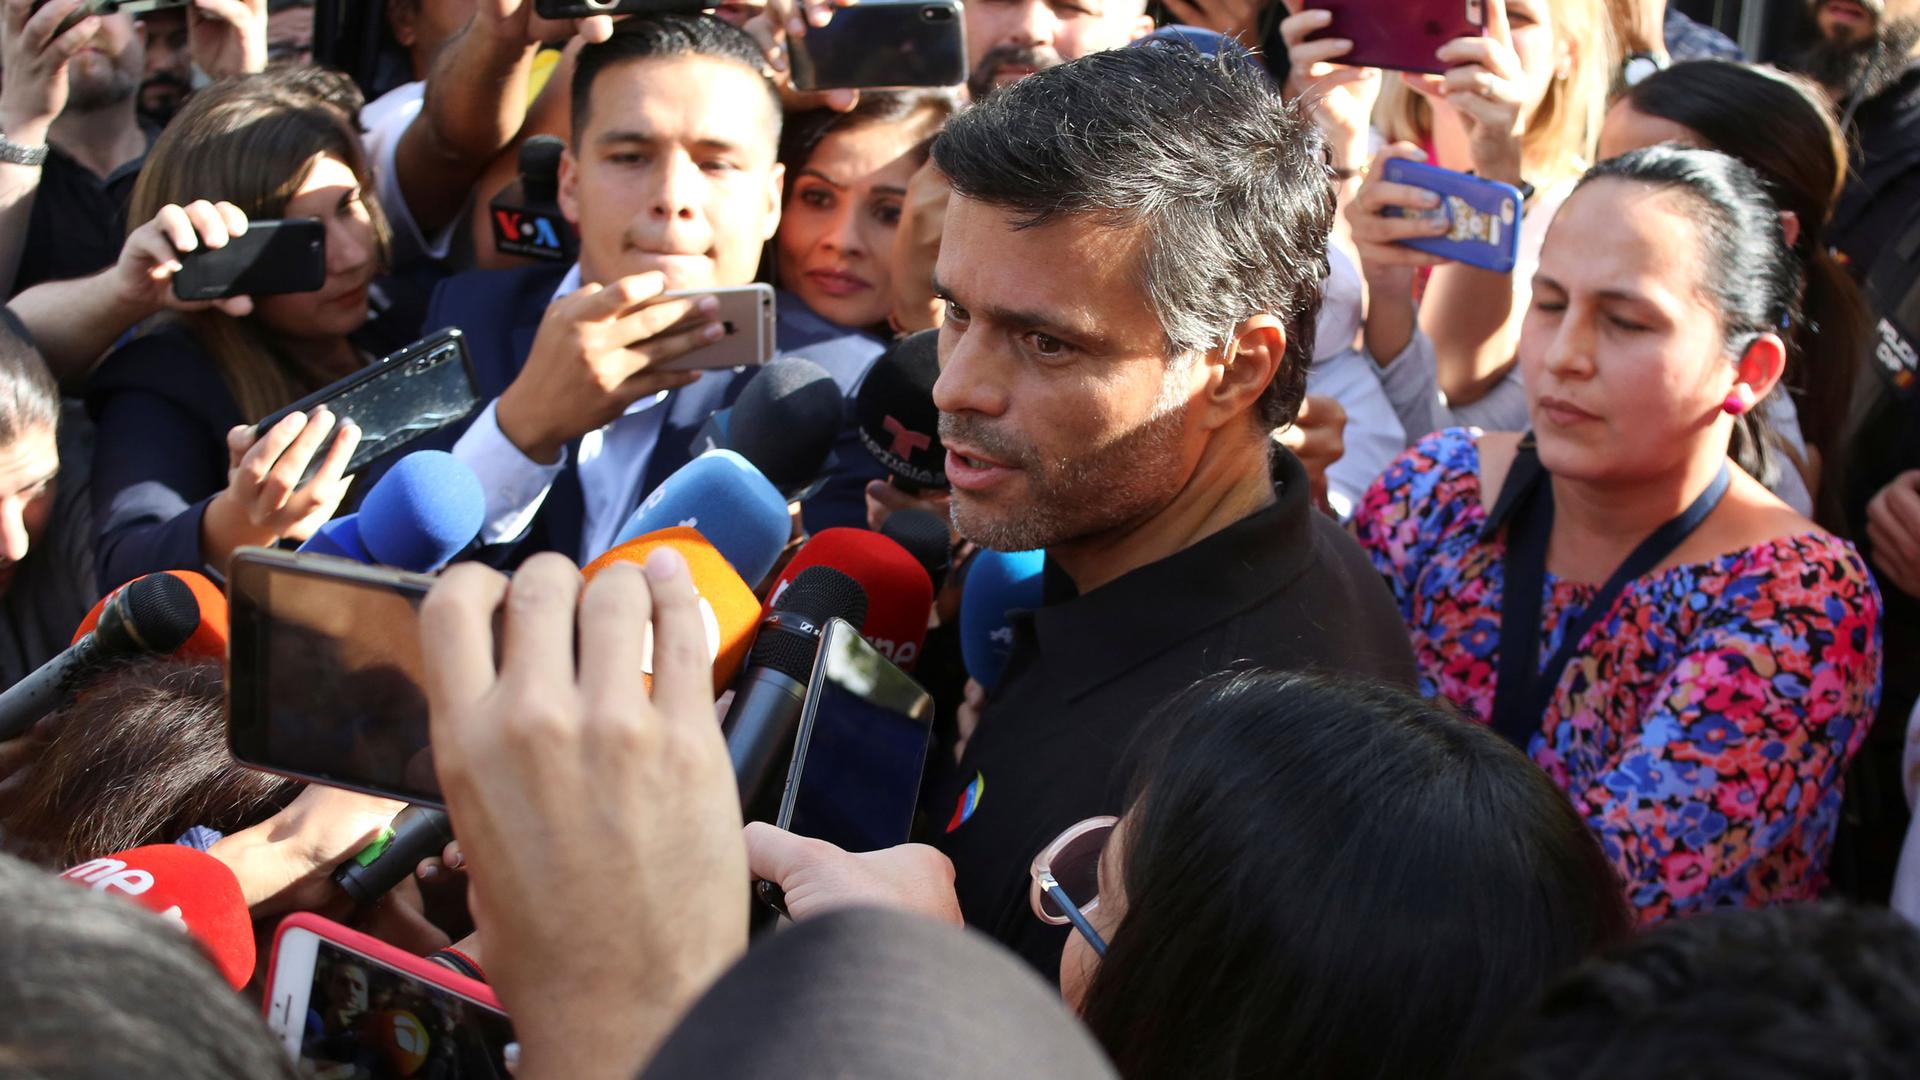 Venezuelan opposition politician Leopoldo López is shown in a crowd of people speaking into several microphones.